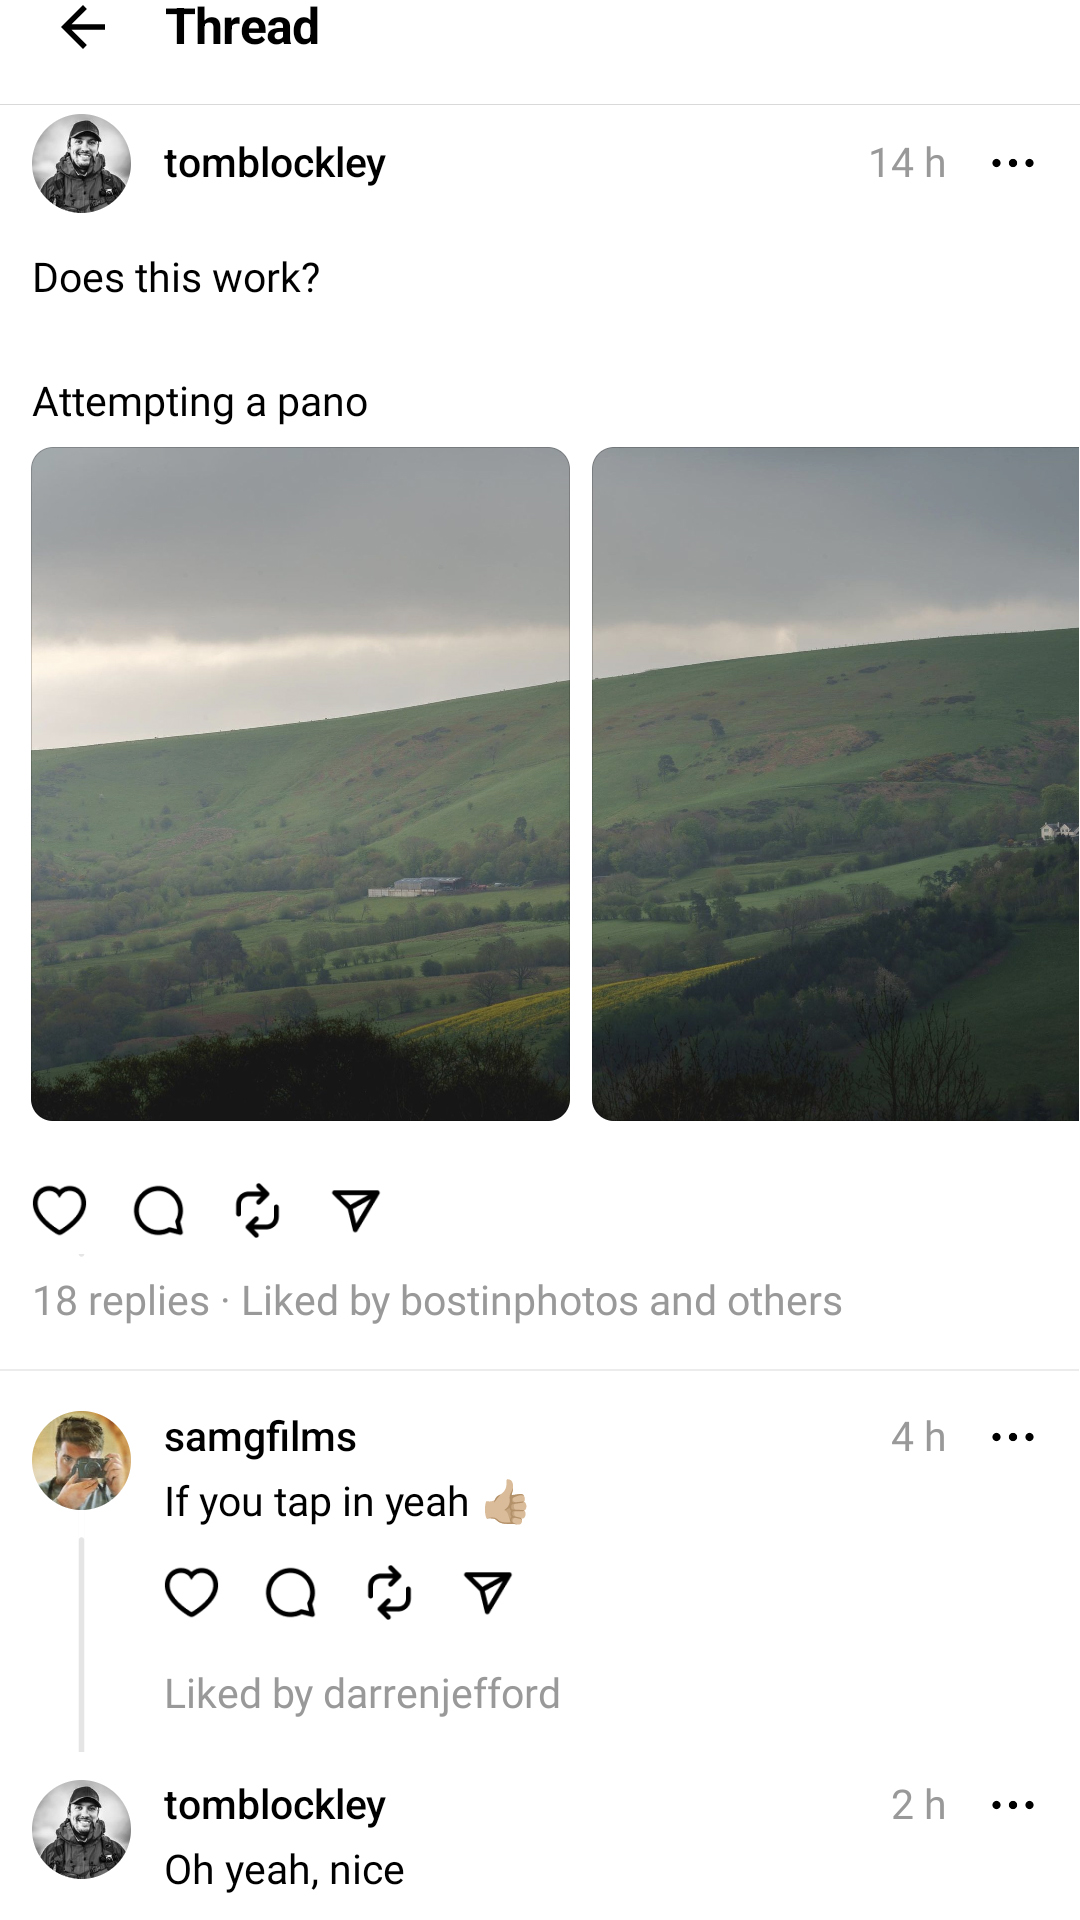 Threads app UI showing a photographer experimenting with a panoramic image